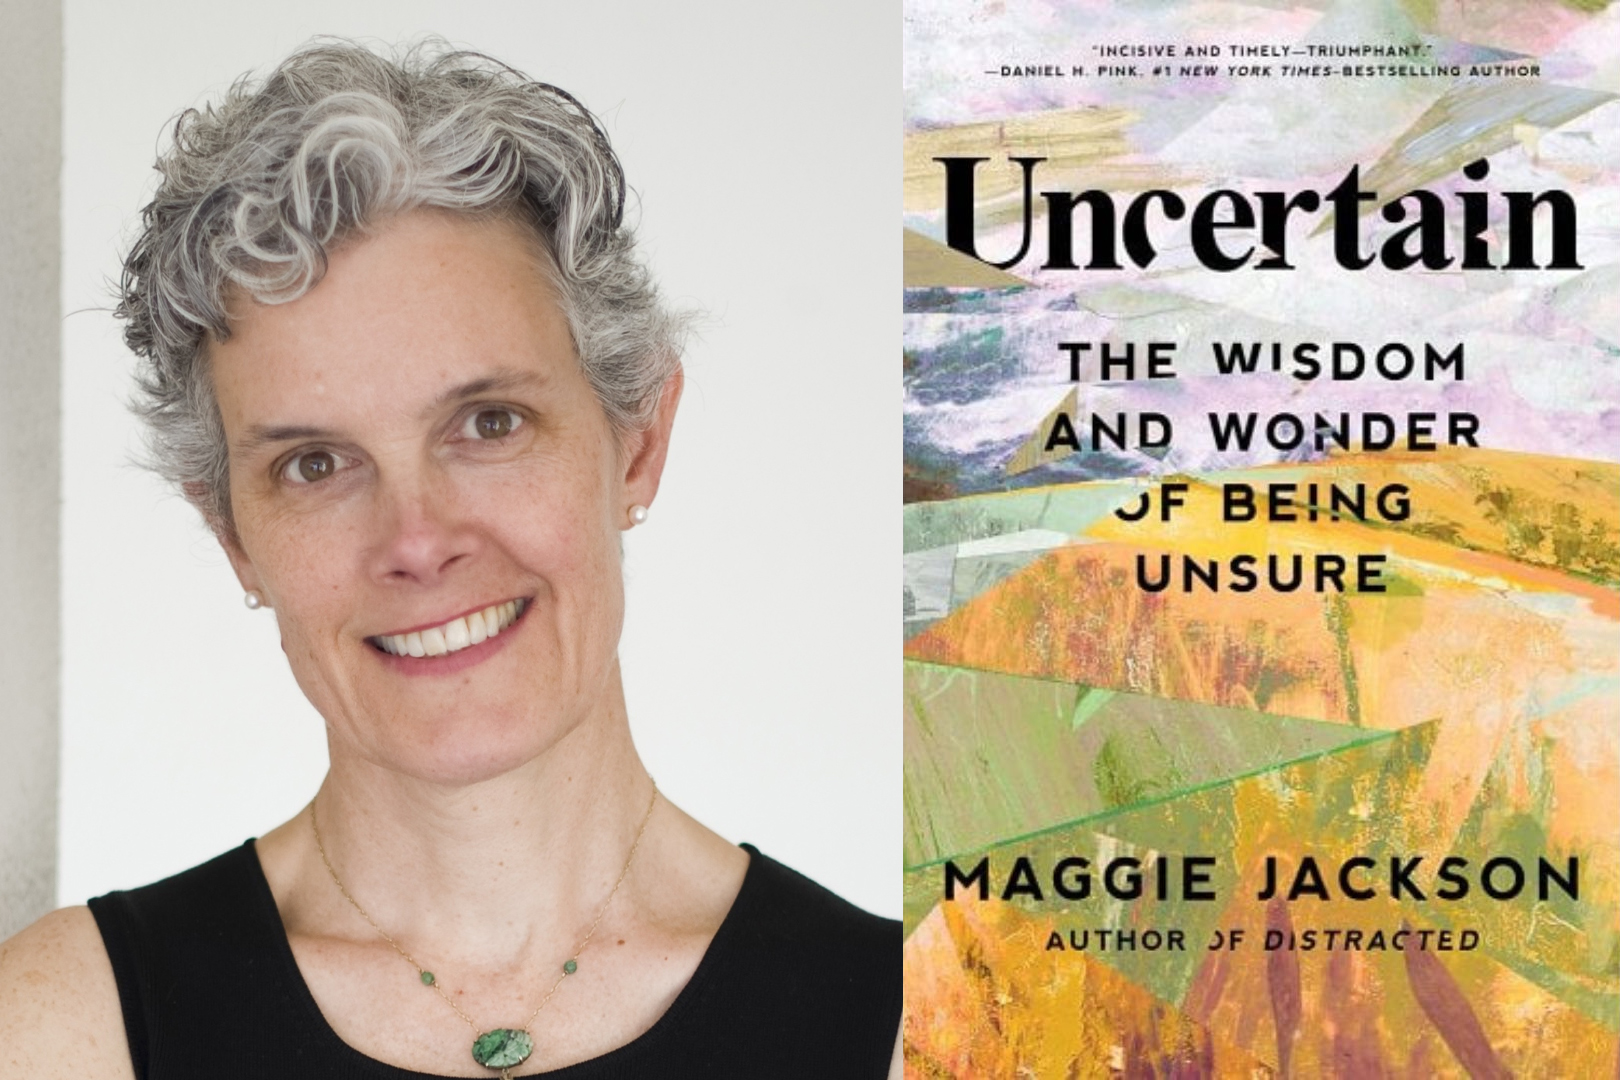 Author Maggie Jackson with the cover of "Uncertain: The Wisdom and Wonder of Being Unsure"